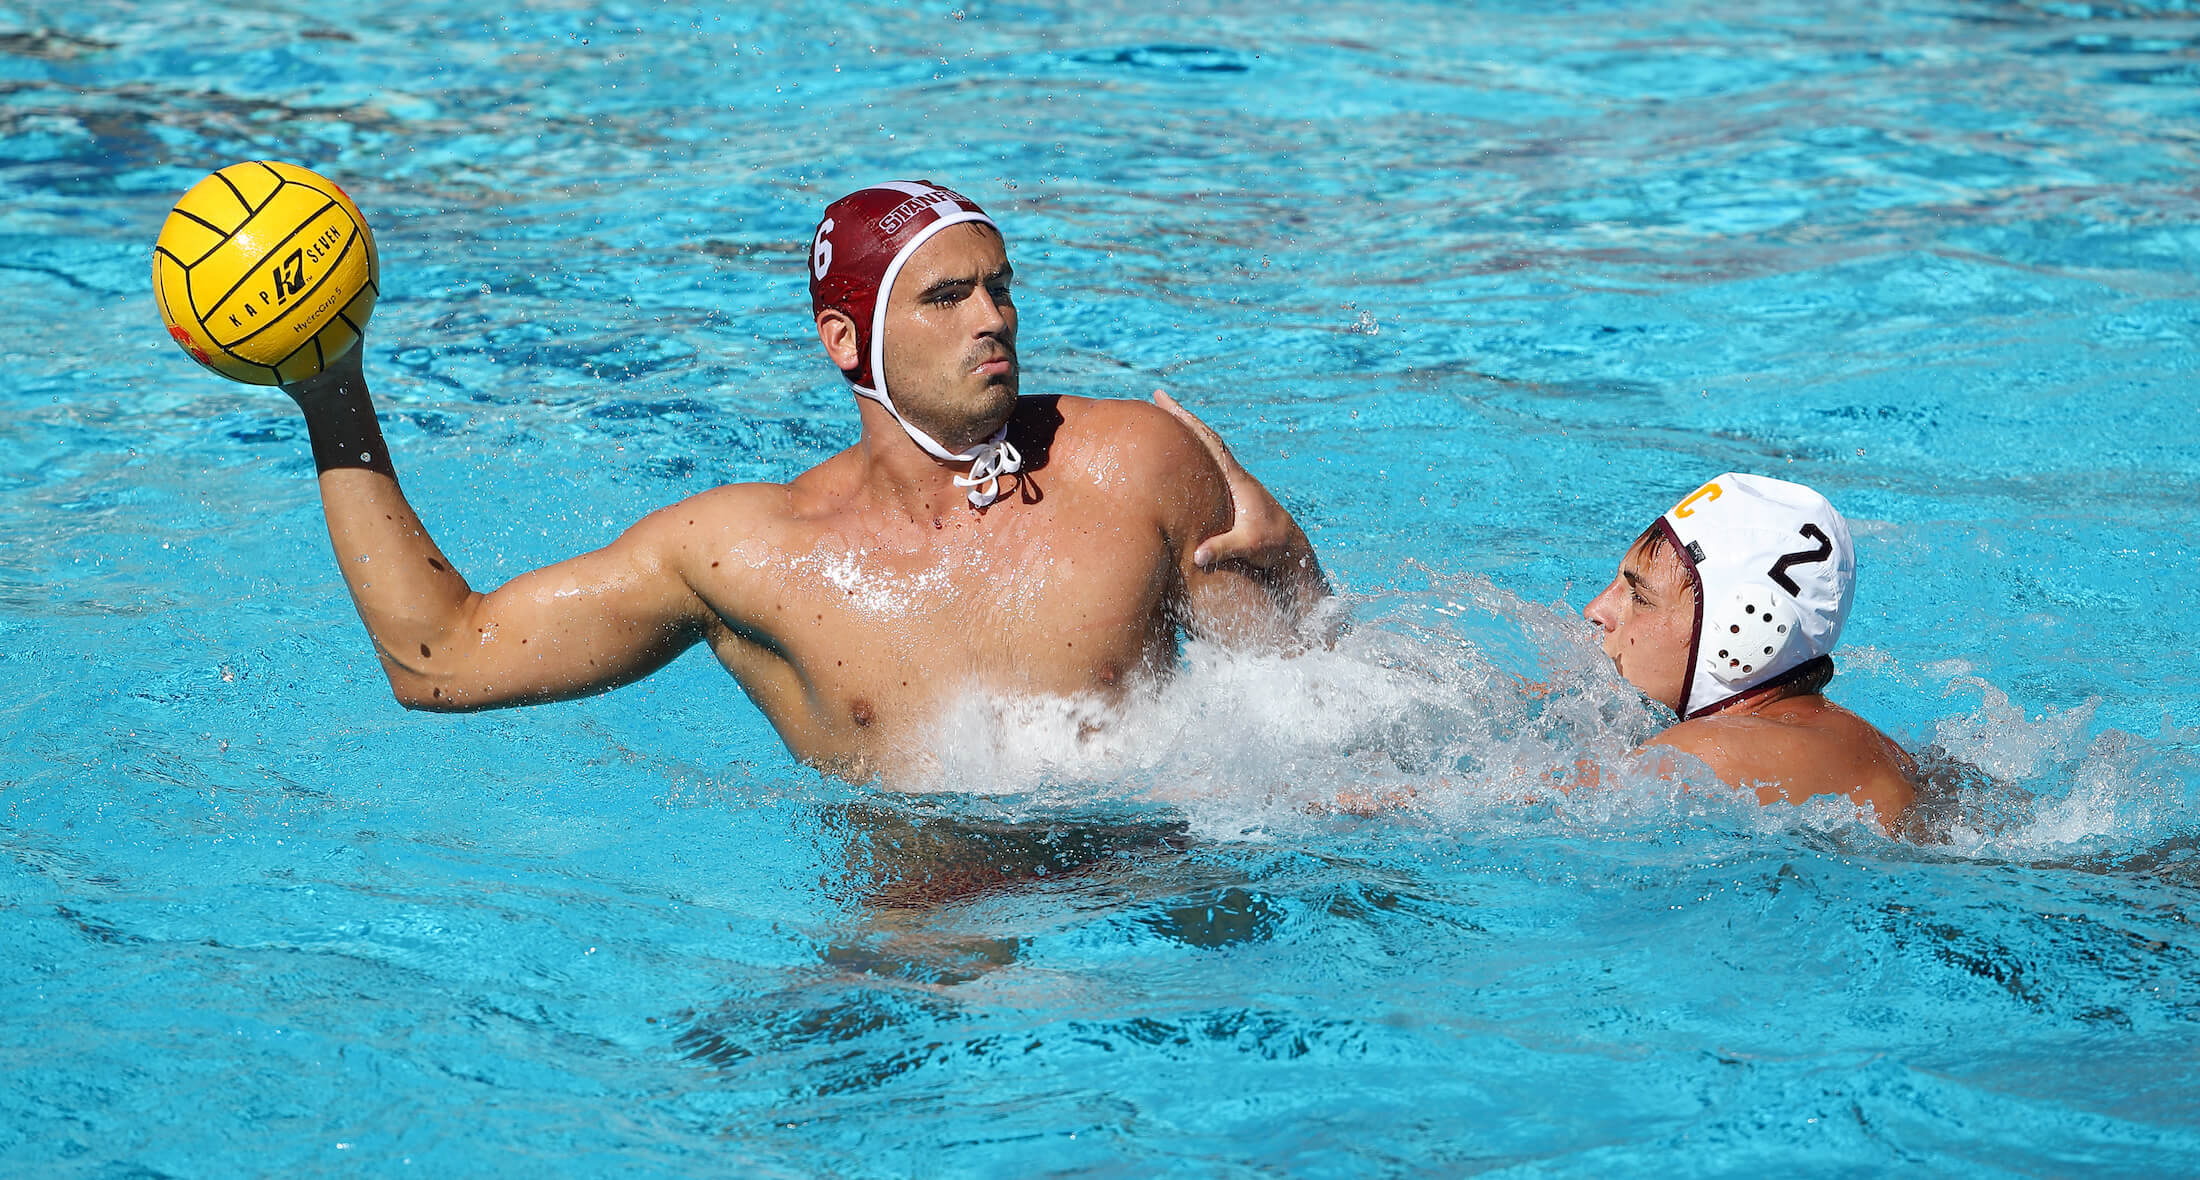 In First Game Since Olympics, U.S. Men's Water Polo Falls to Greece